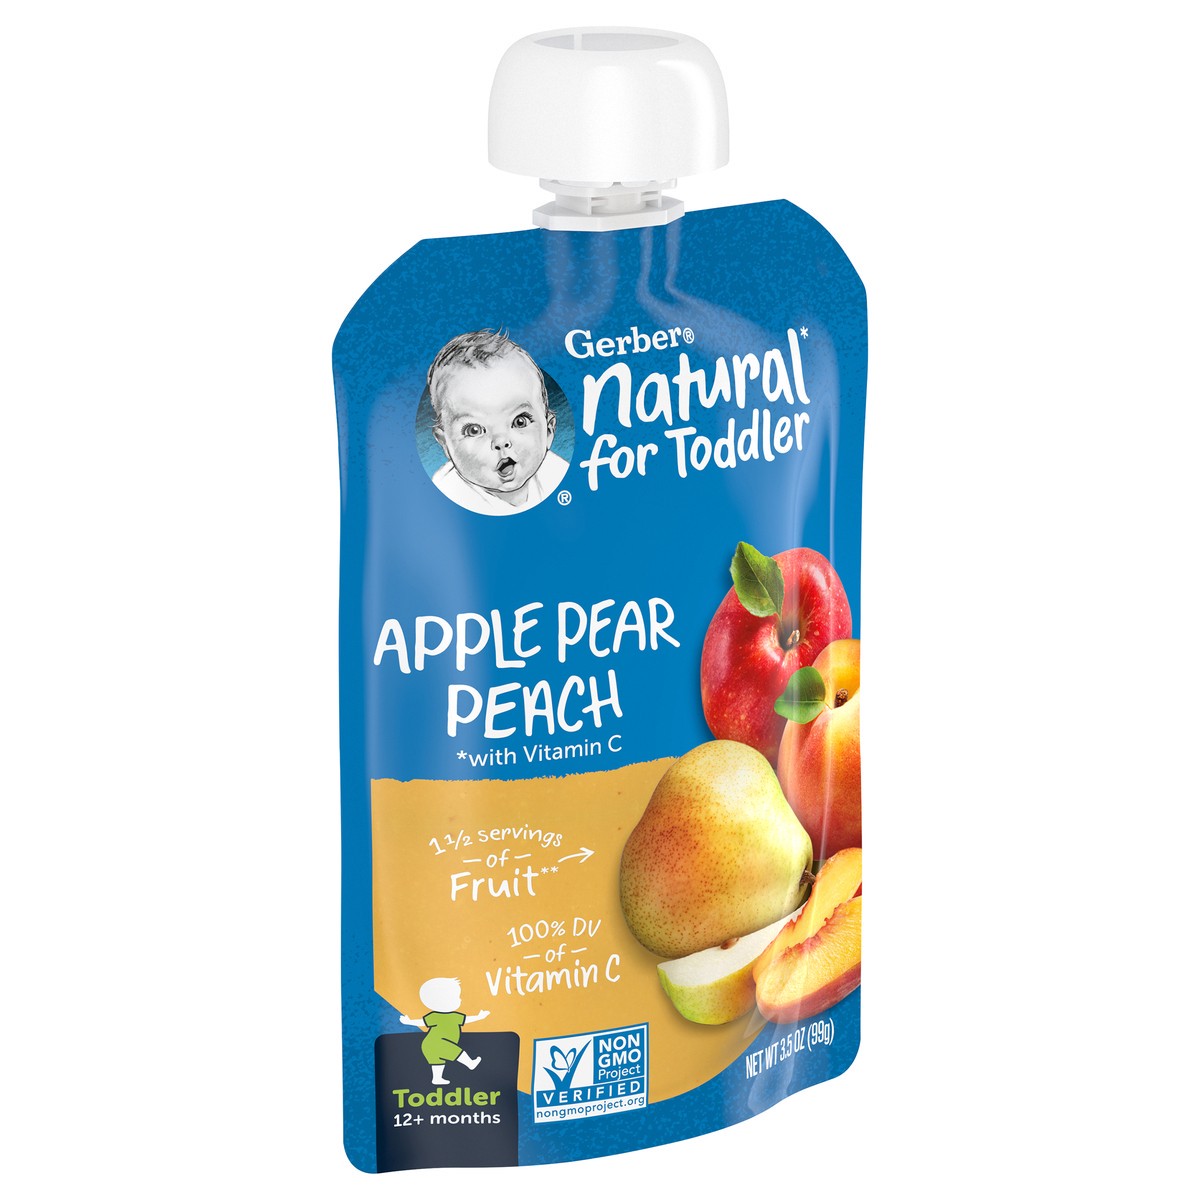 slide 6 of 9, Gerber Natural for Toddler, Apple Pear Peach Toddler Pouch, 3.5 oz Pouch, 3.5 oz